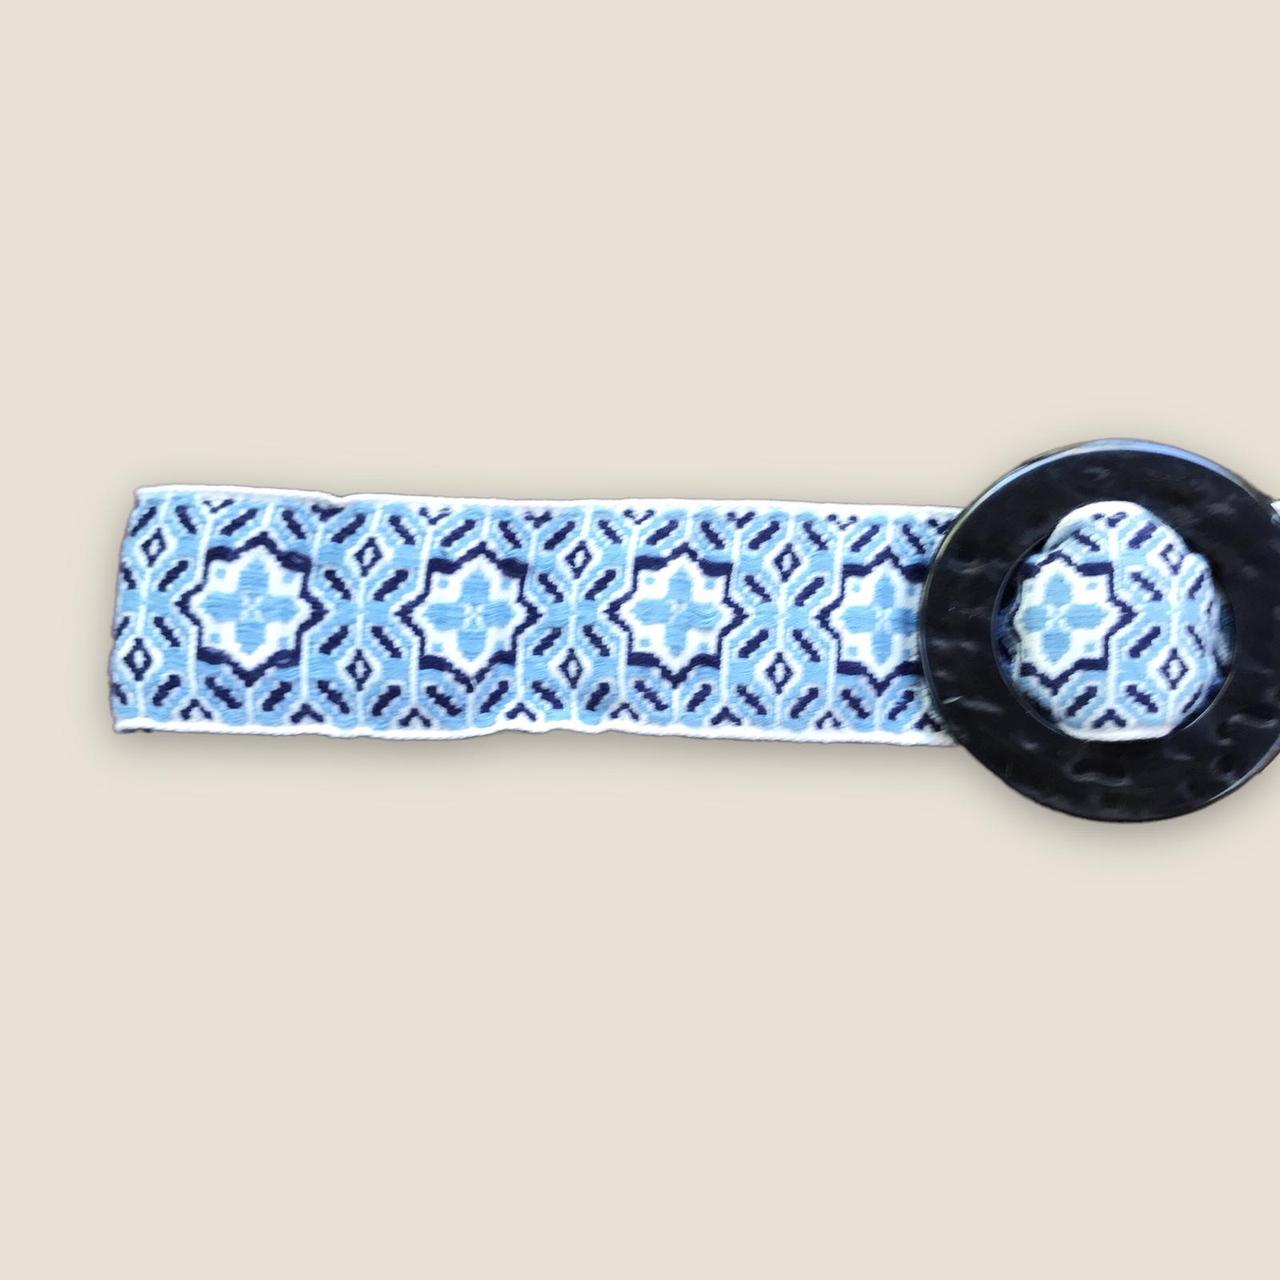 American Vintage Women's Blue and White Belt (3)